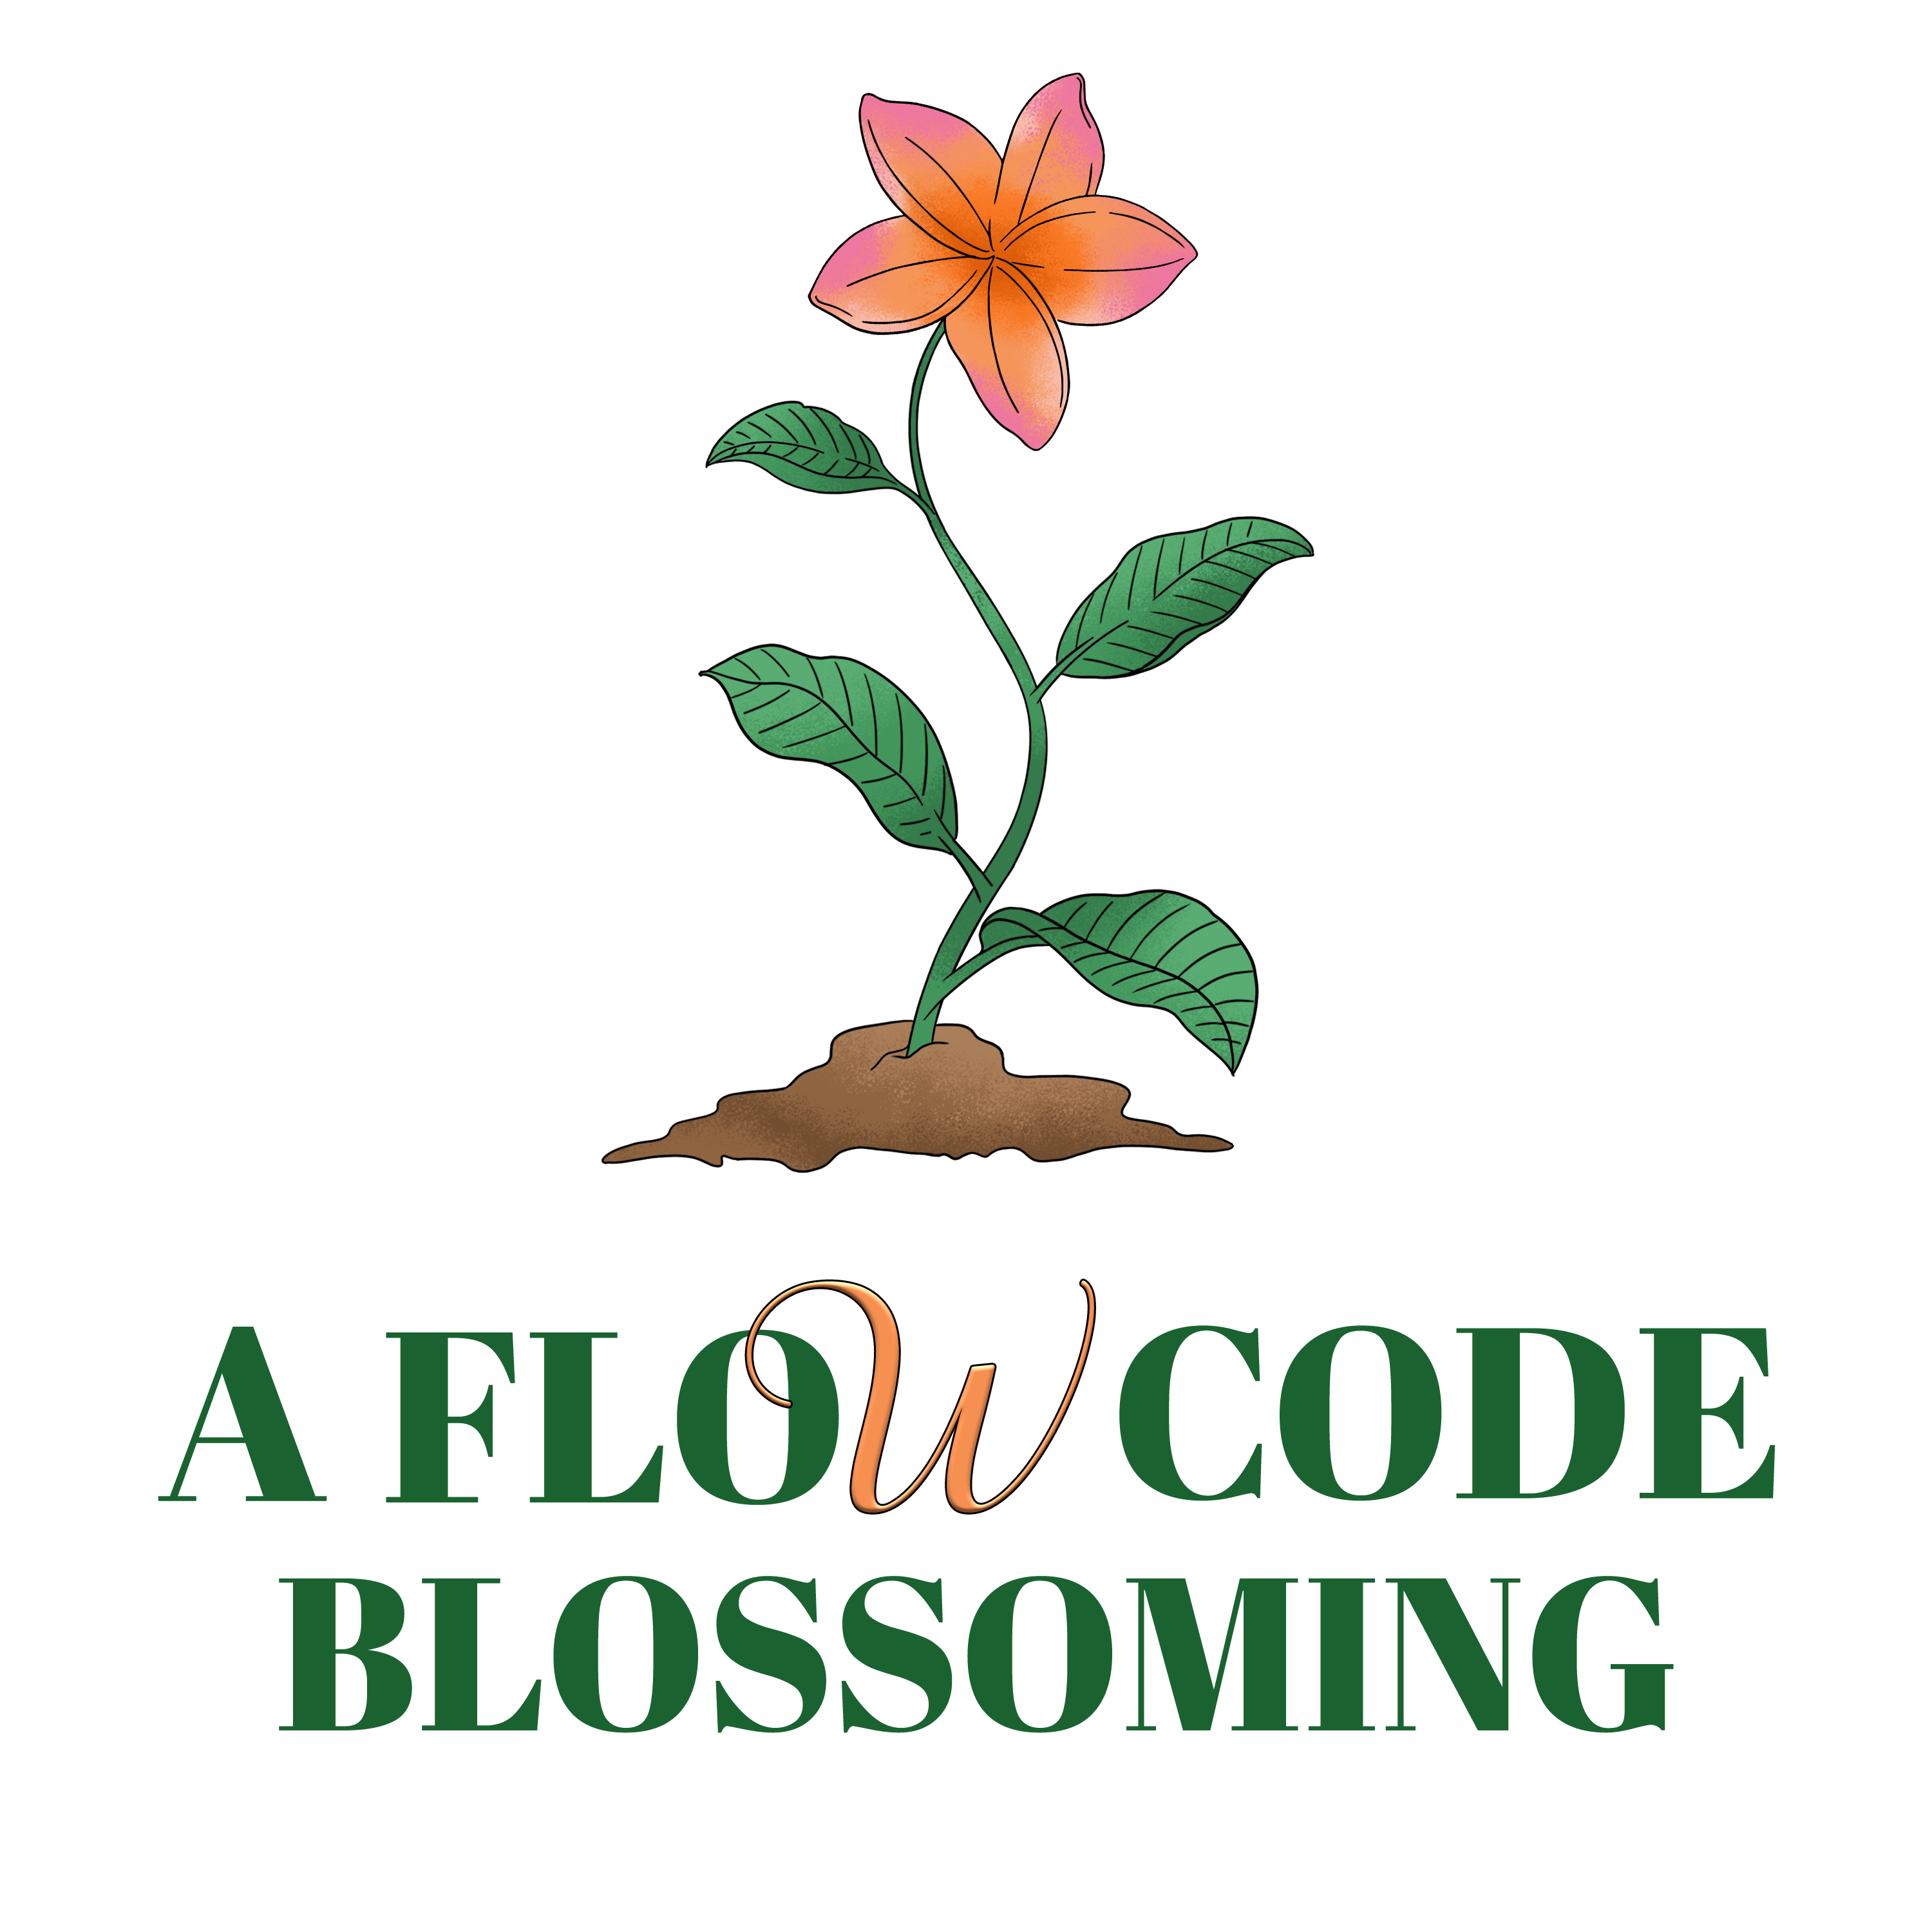 A-Flow-Code-Blossoming